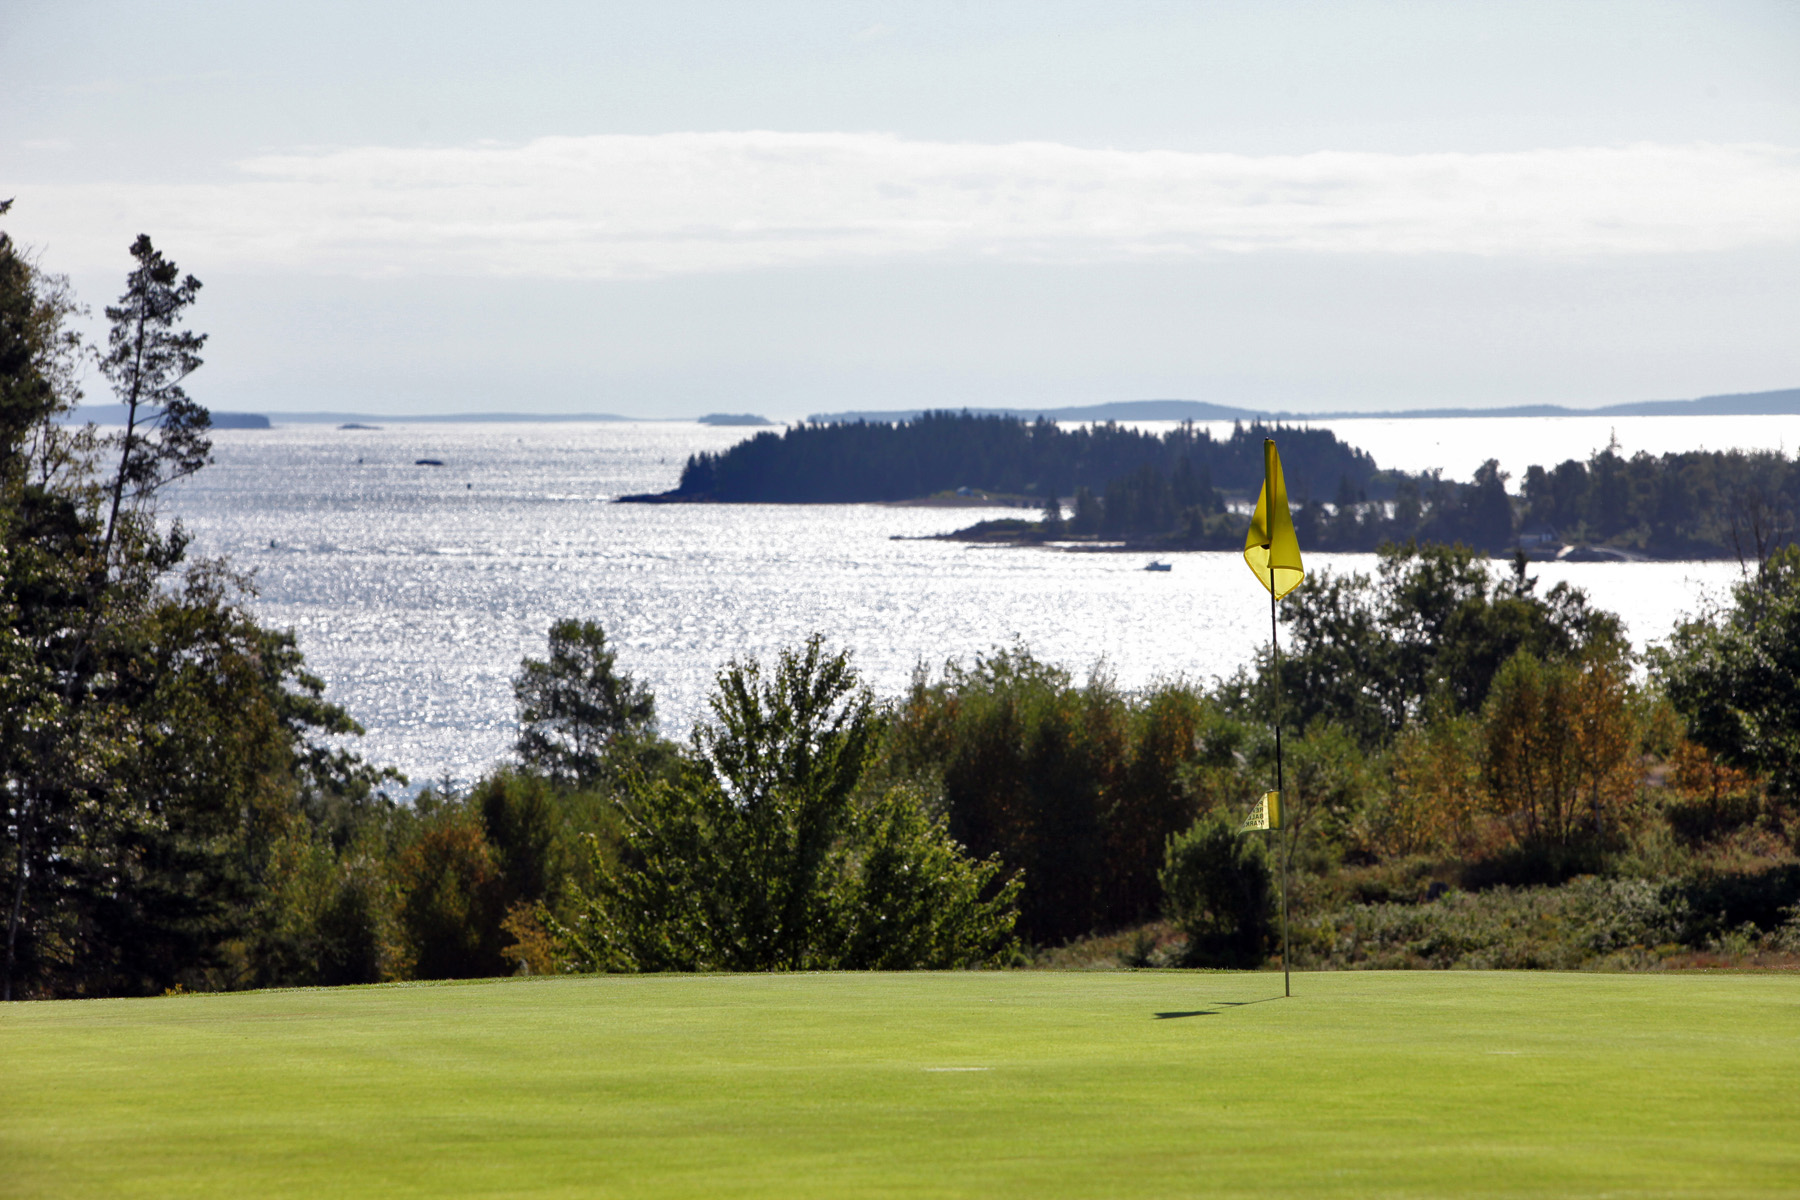 Play a round of golf at North Haven's spectacular 9-hole course.